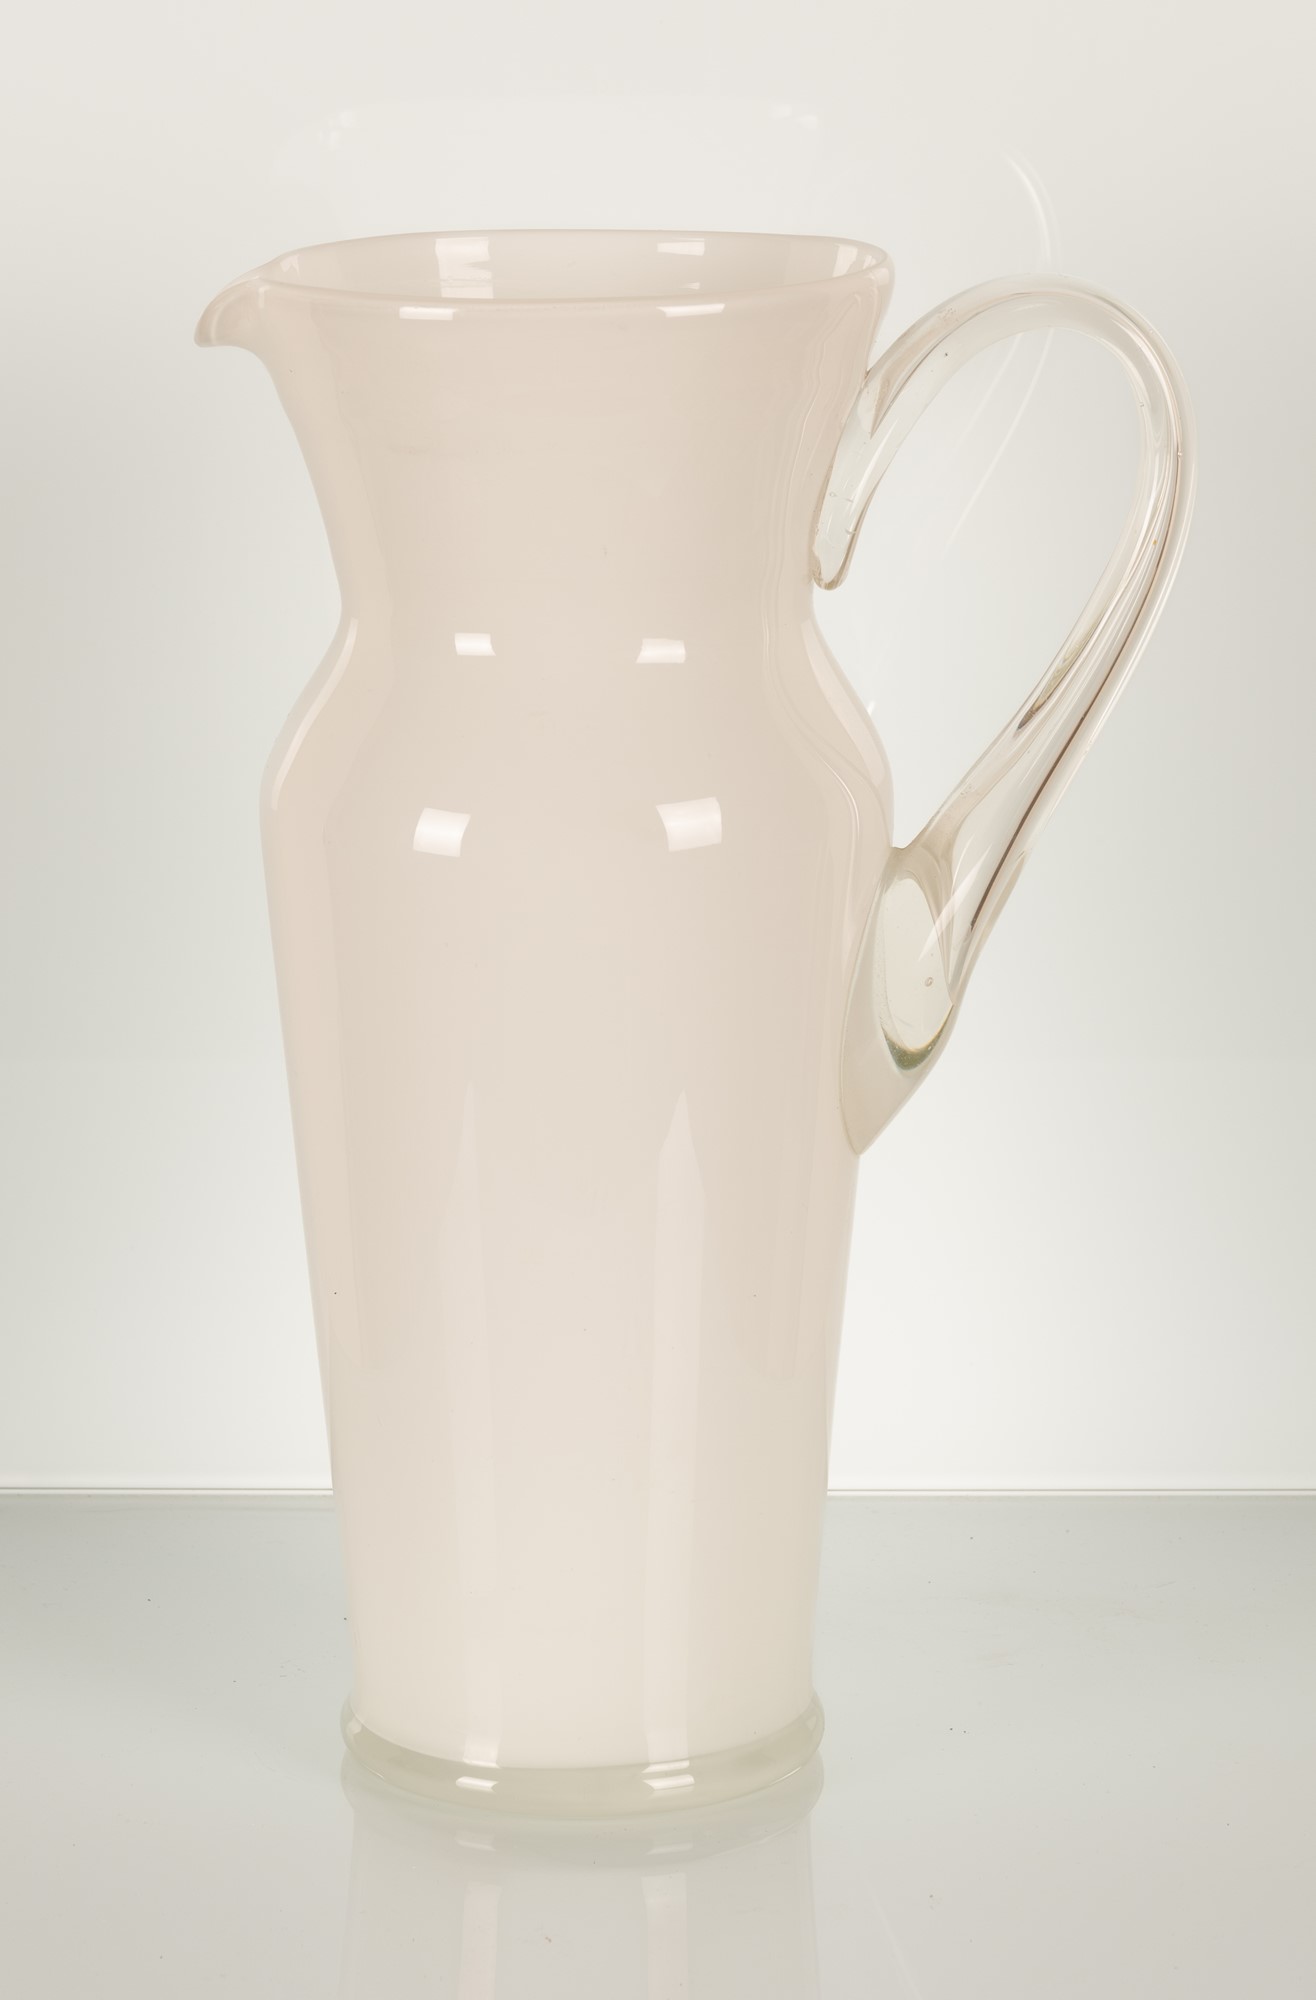 White glass carafe - Image 2 of 19